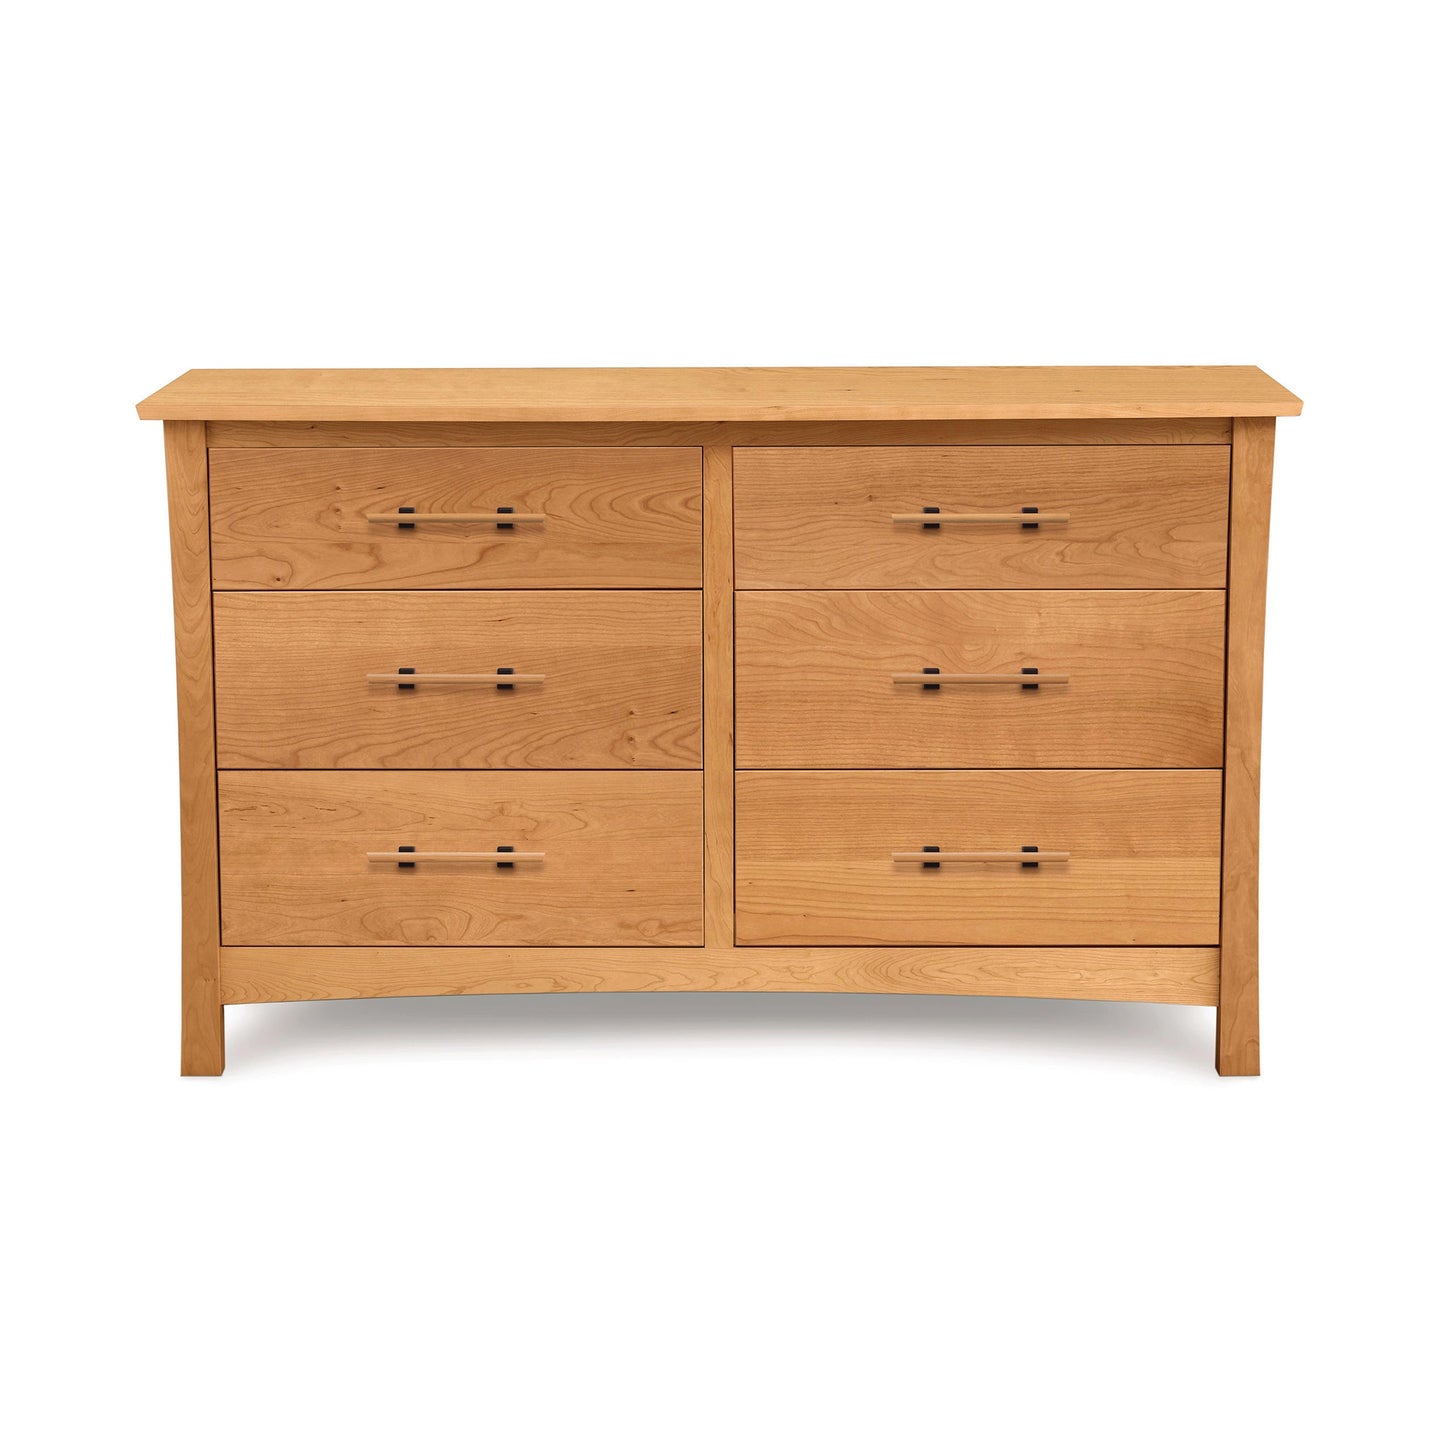 A wooden dresser with four drawers.